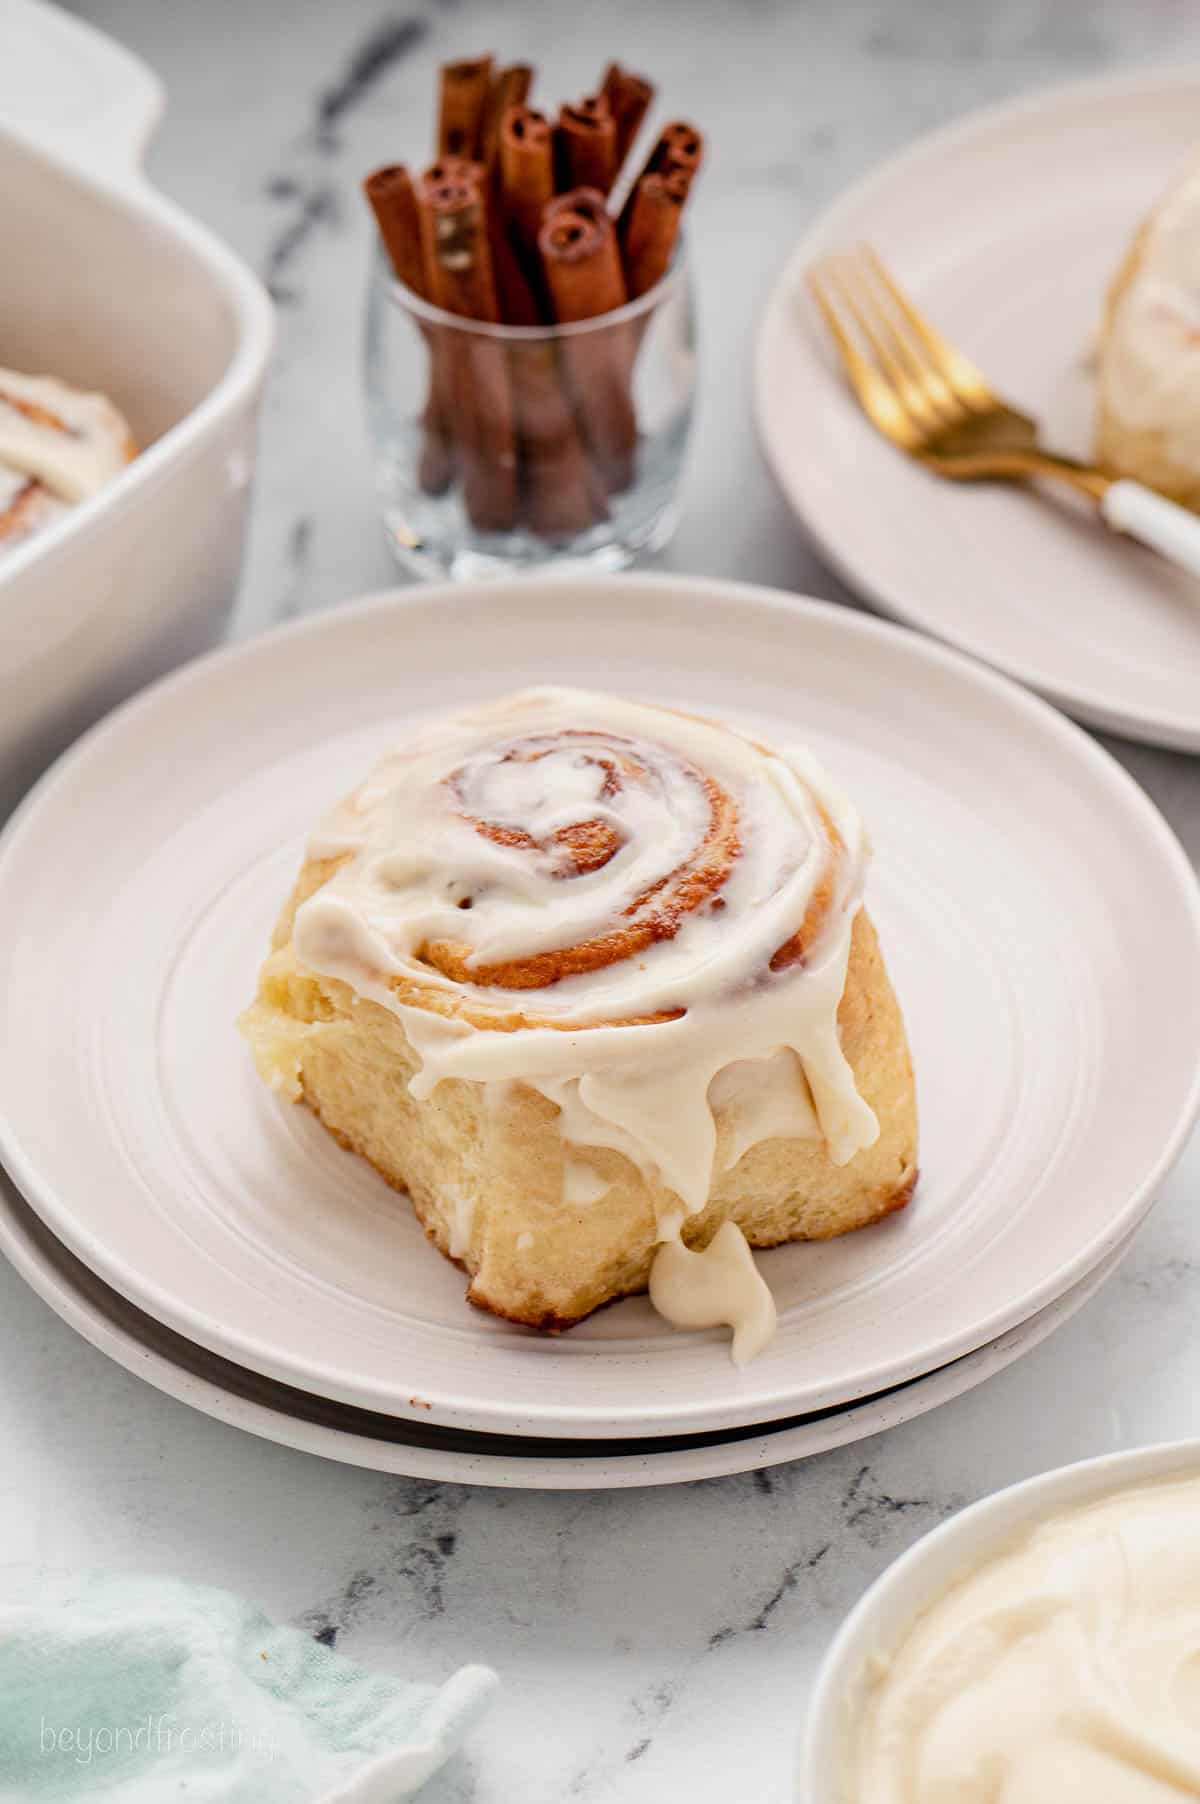 A cinnamon roll topped with cream cheese frosting on a plate.